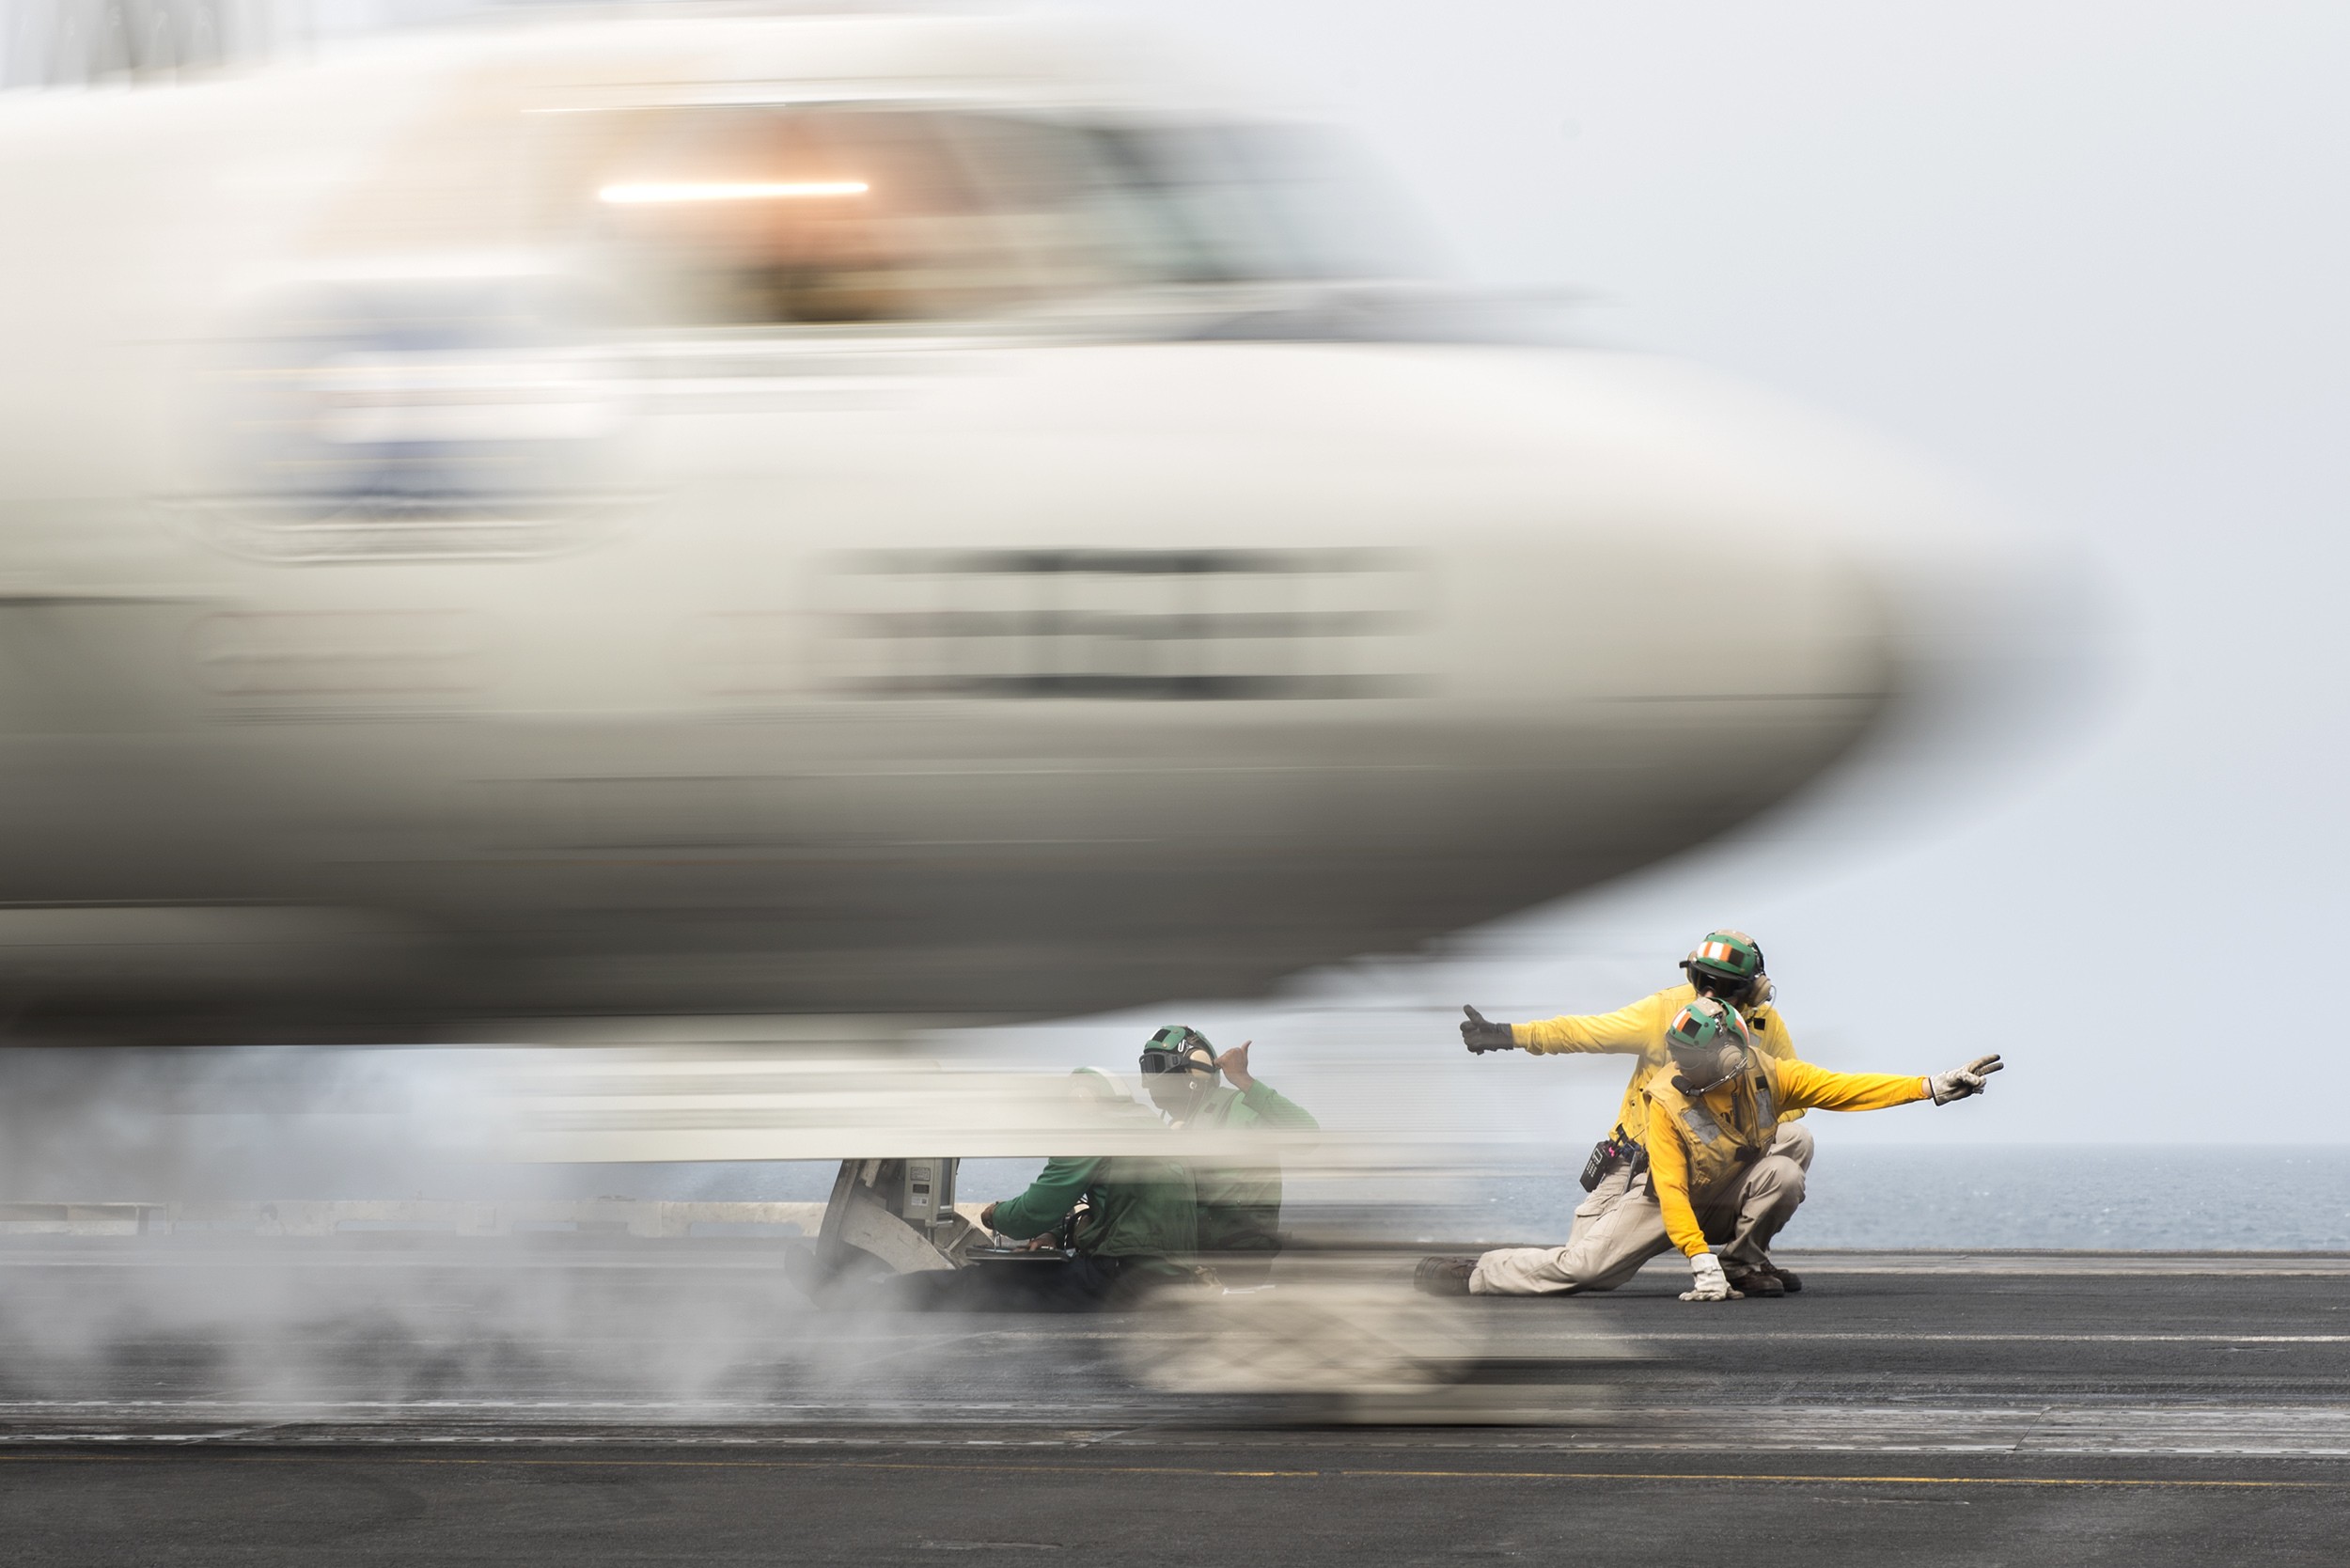 General 2500x1668 aircraft vehicle aircraft carrier motion blur military aircraft military